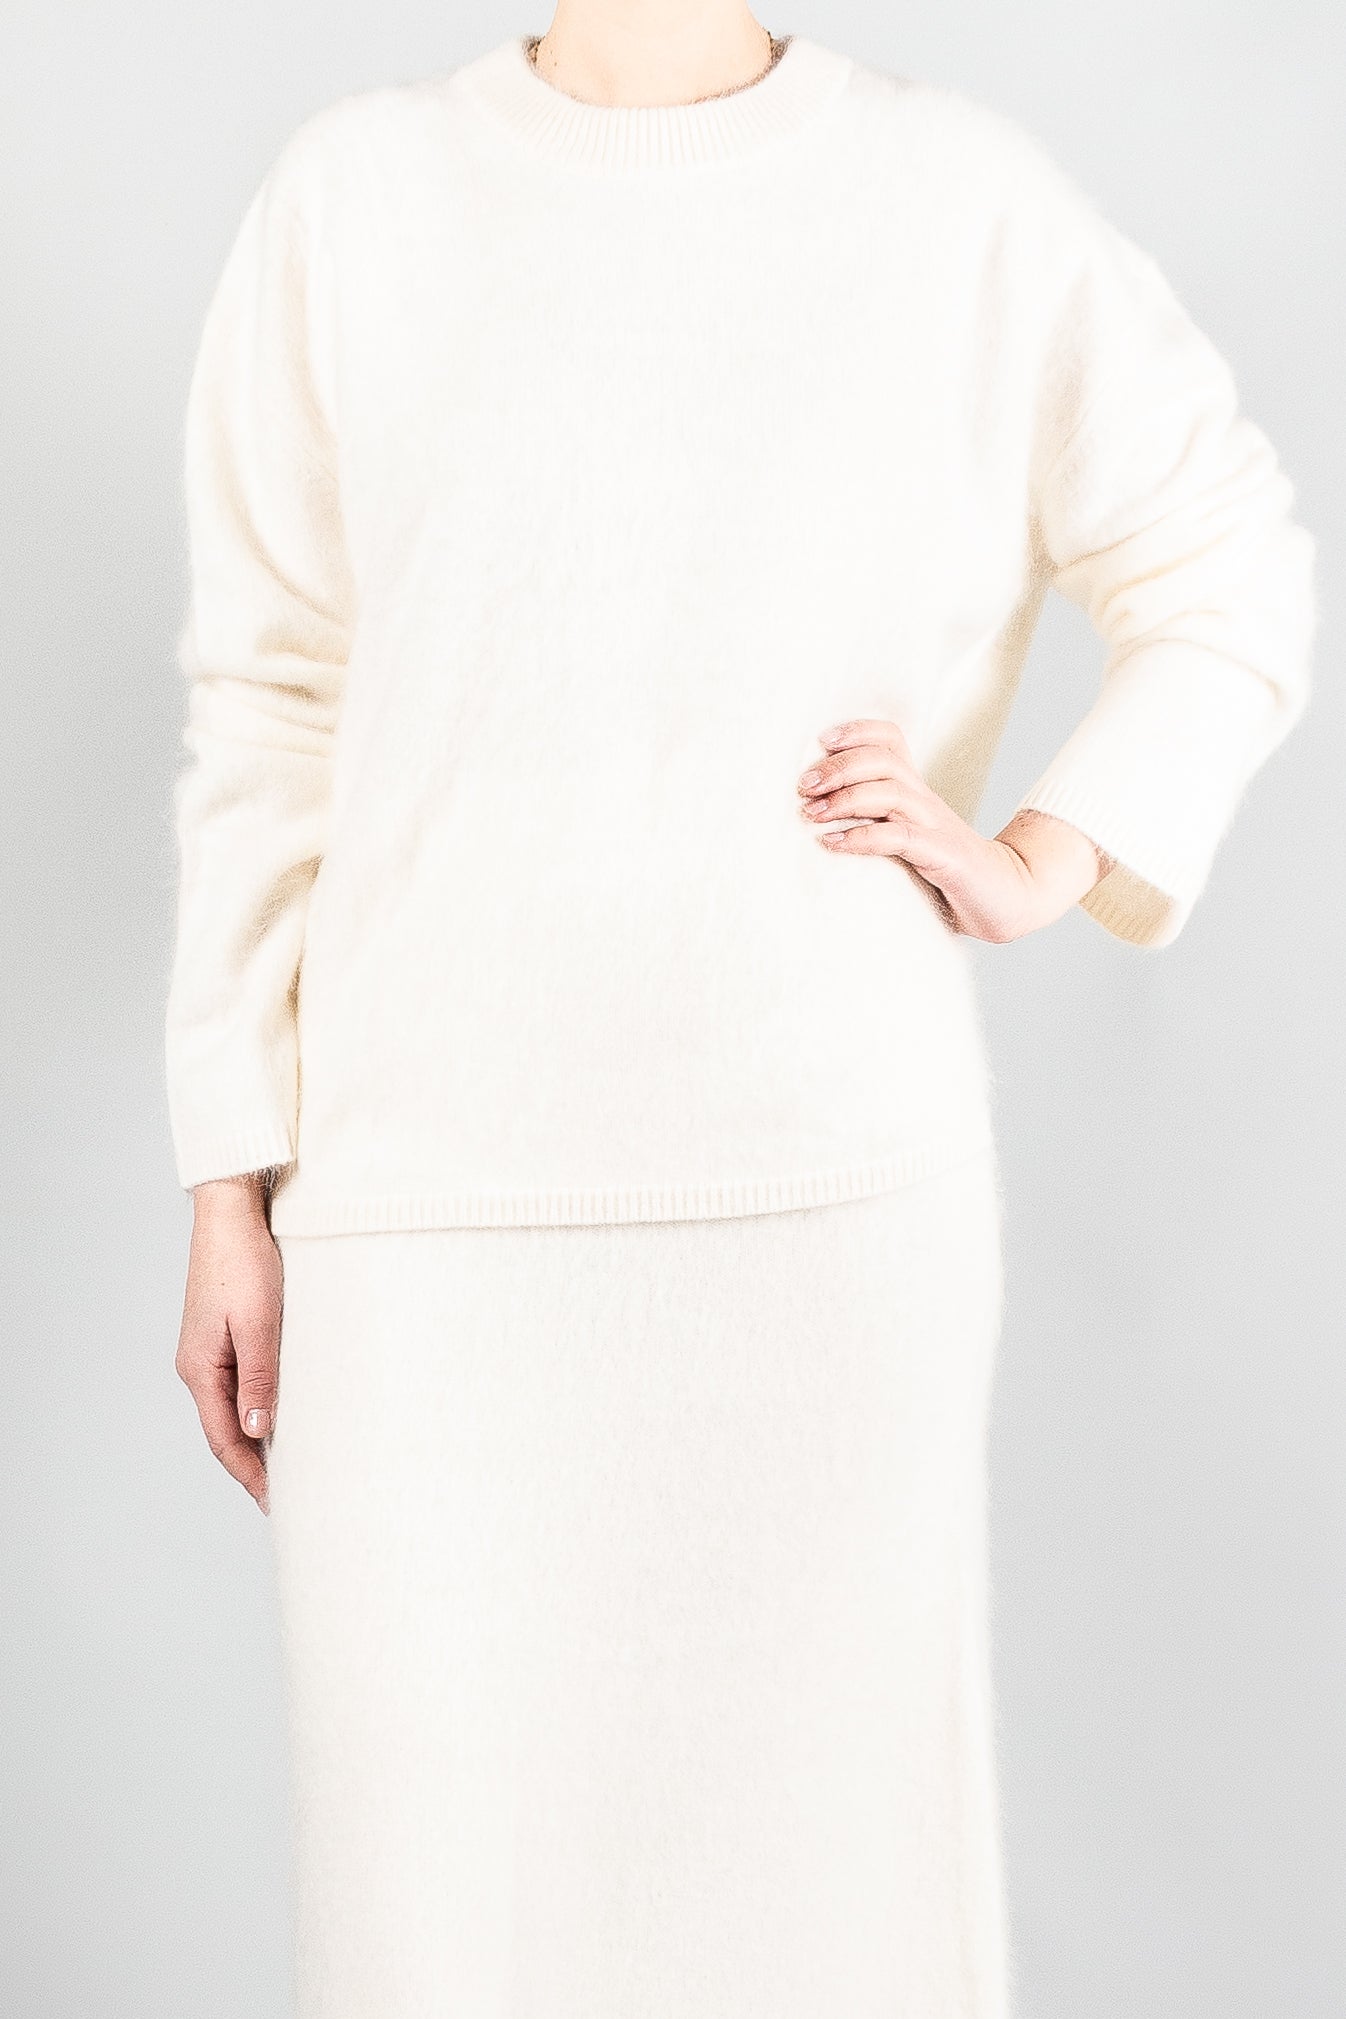 Lisa Yang Natalia Sweater-Knitwear-Misch-Boutique-Vancouver-Canada-misch.ca